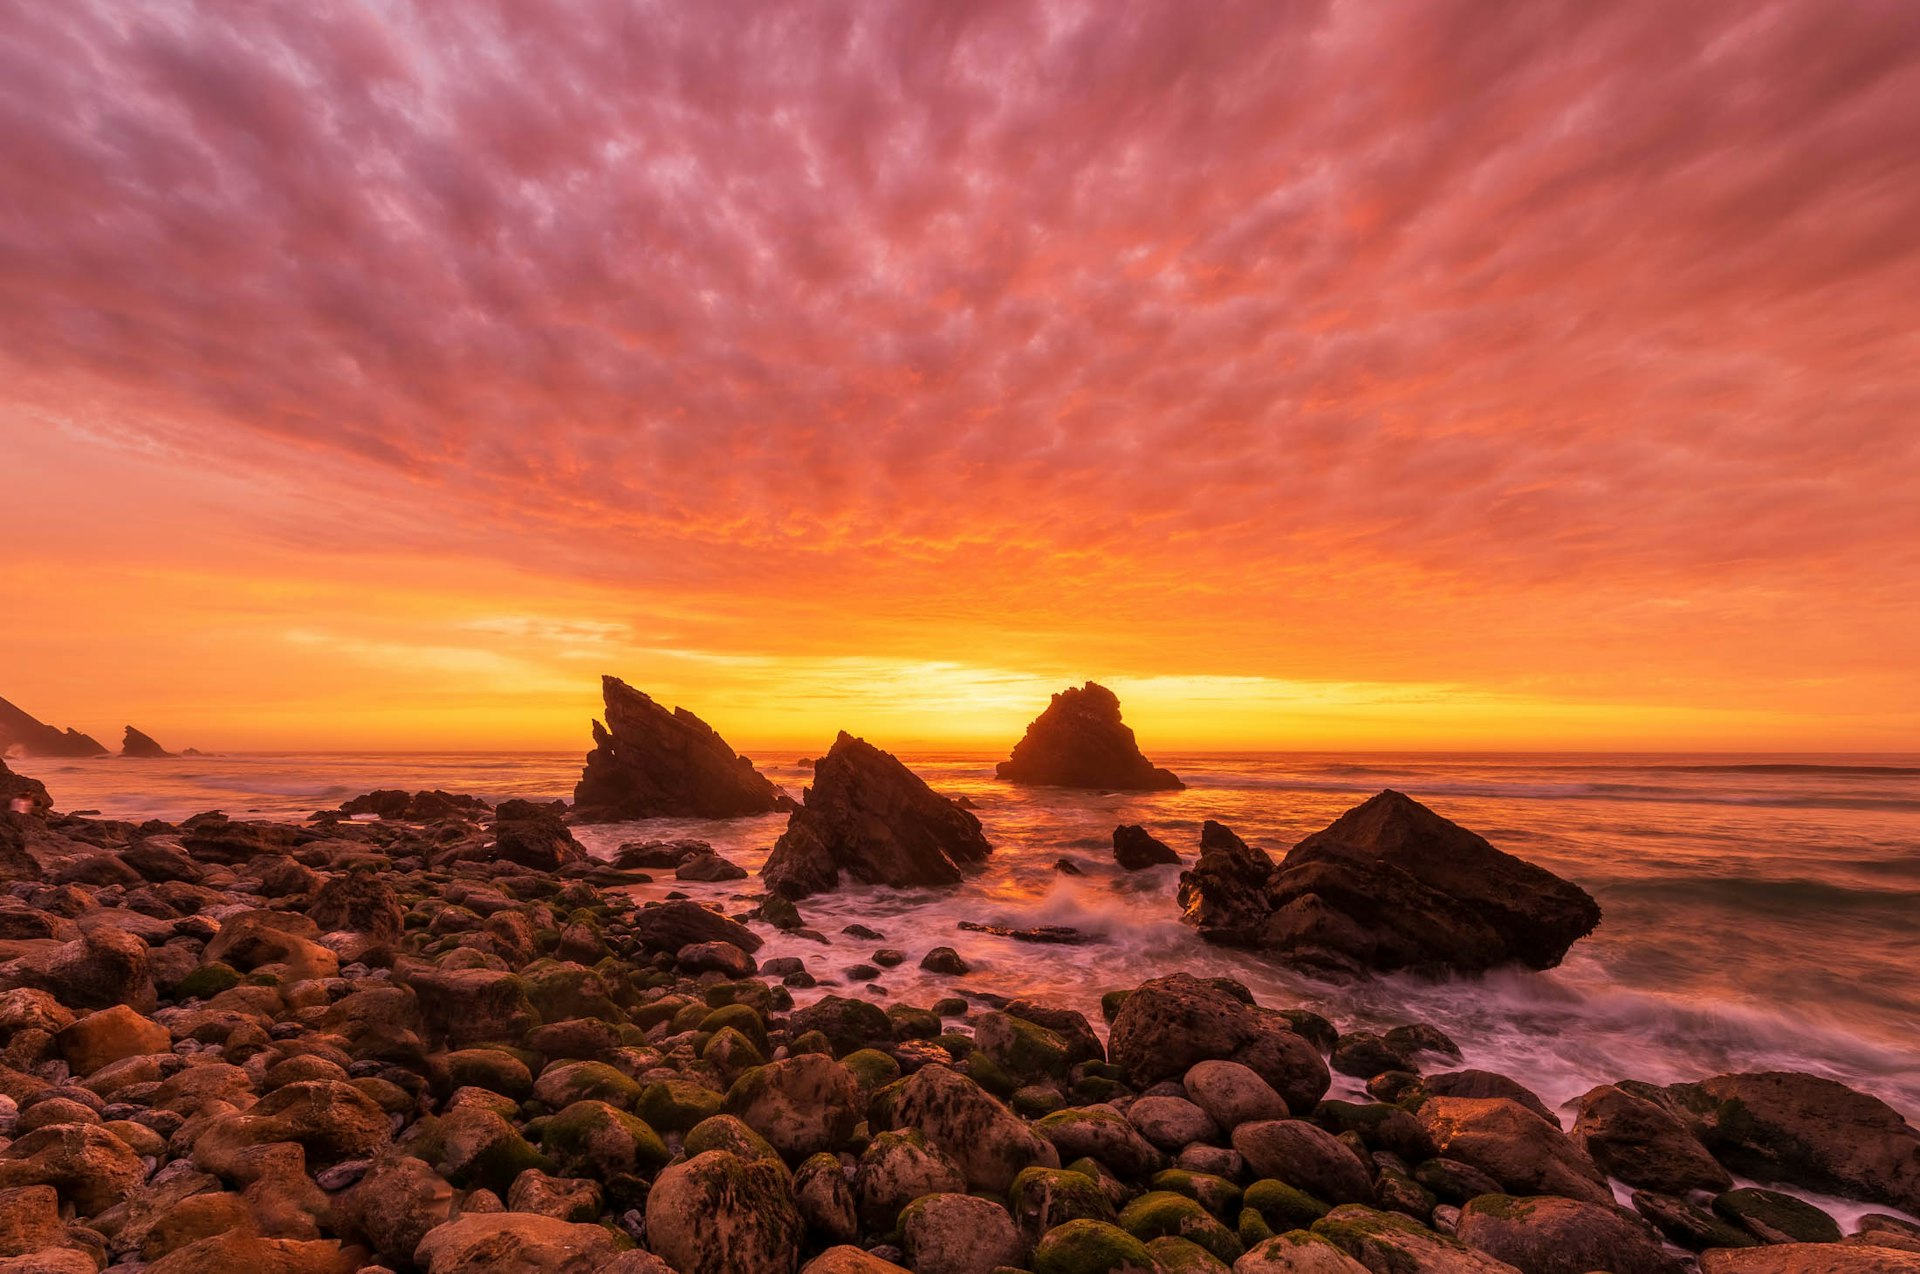 A dramatic sunset streaks orange and pink light across the sky with rocks on a beach in silhouette 